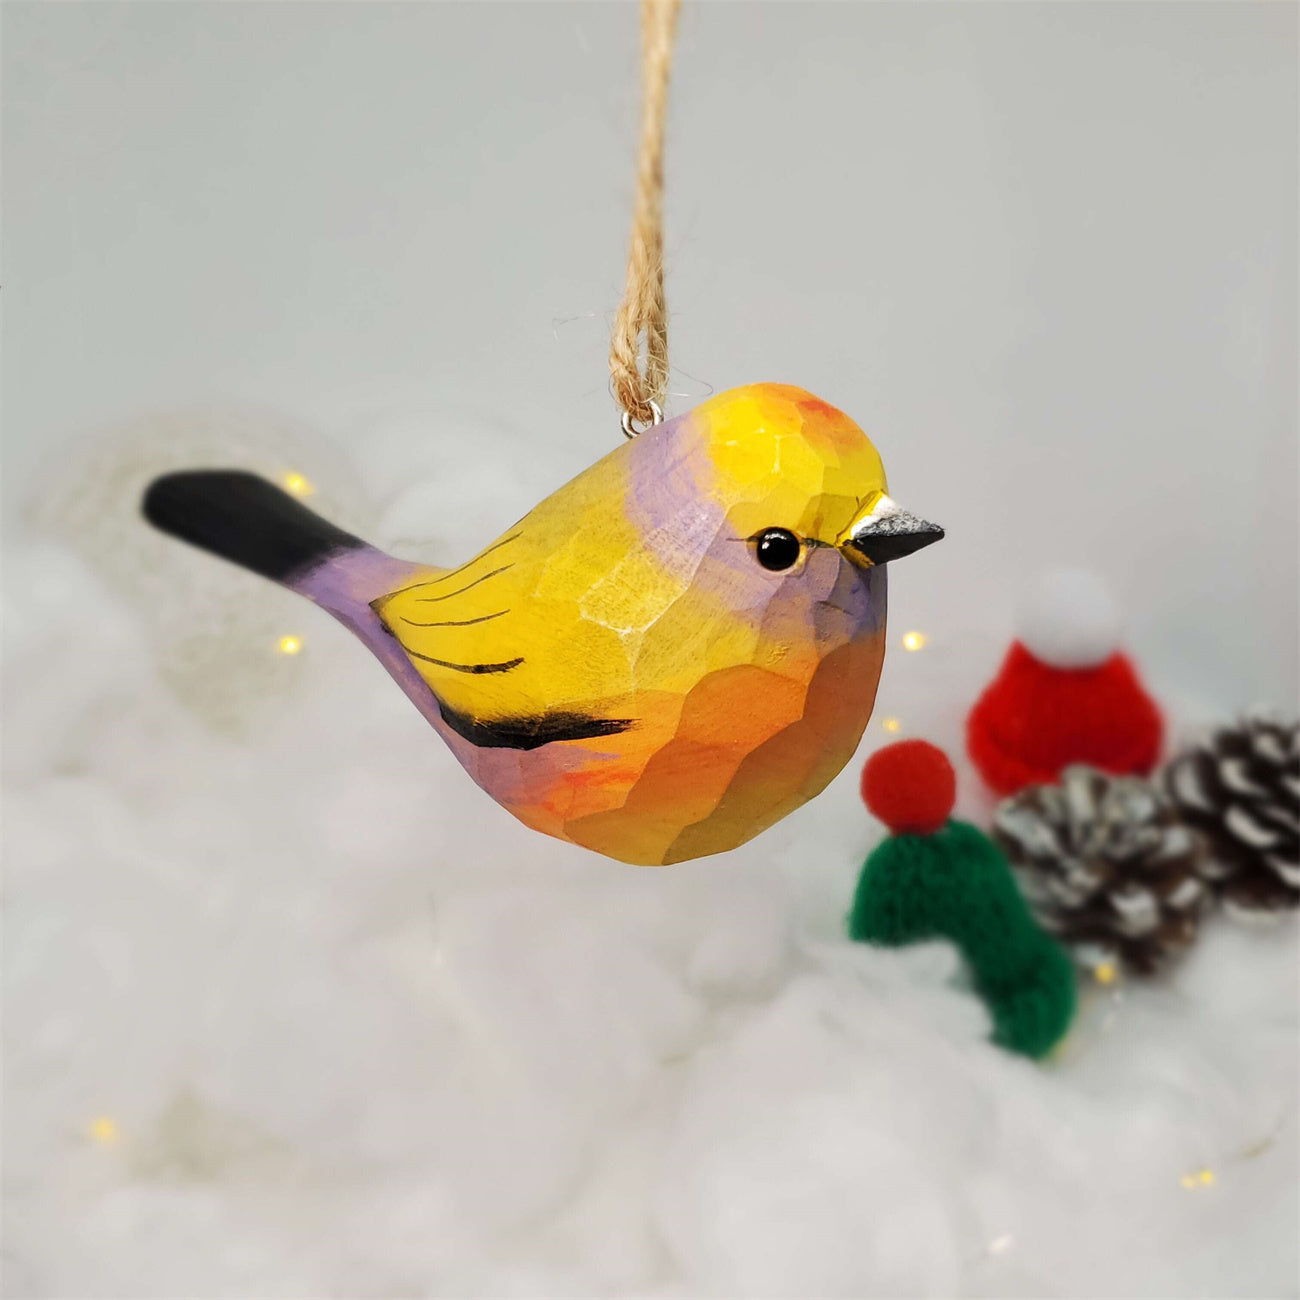 White-Browed Tit-warbler Carved and Painted Wooden Bird Ornaments